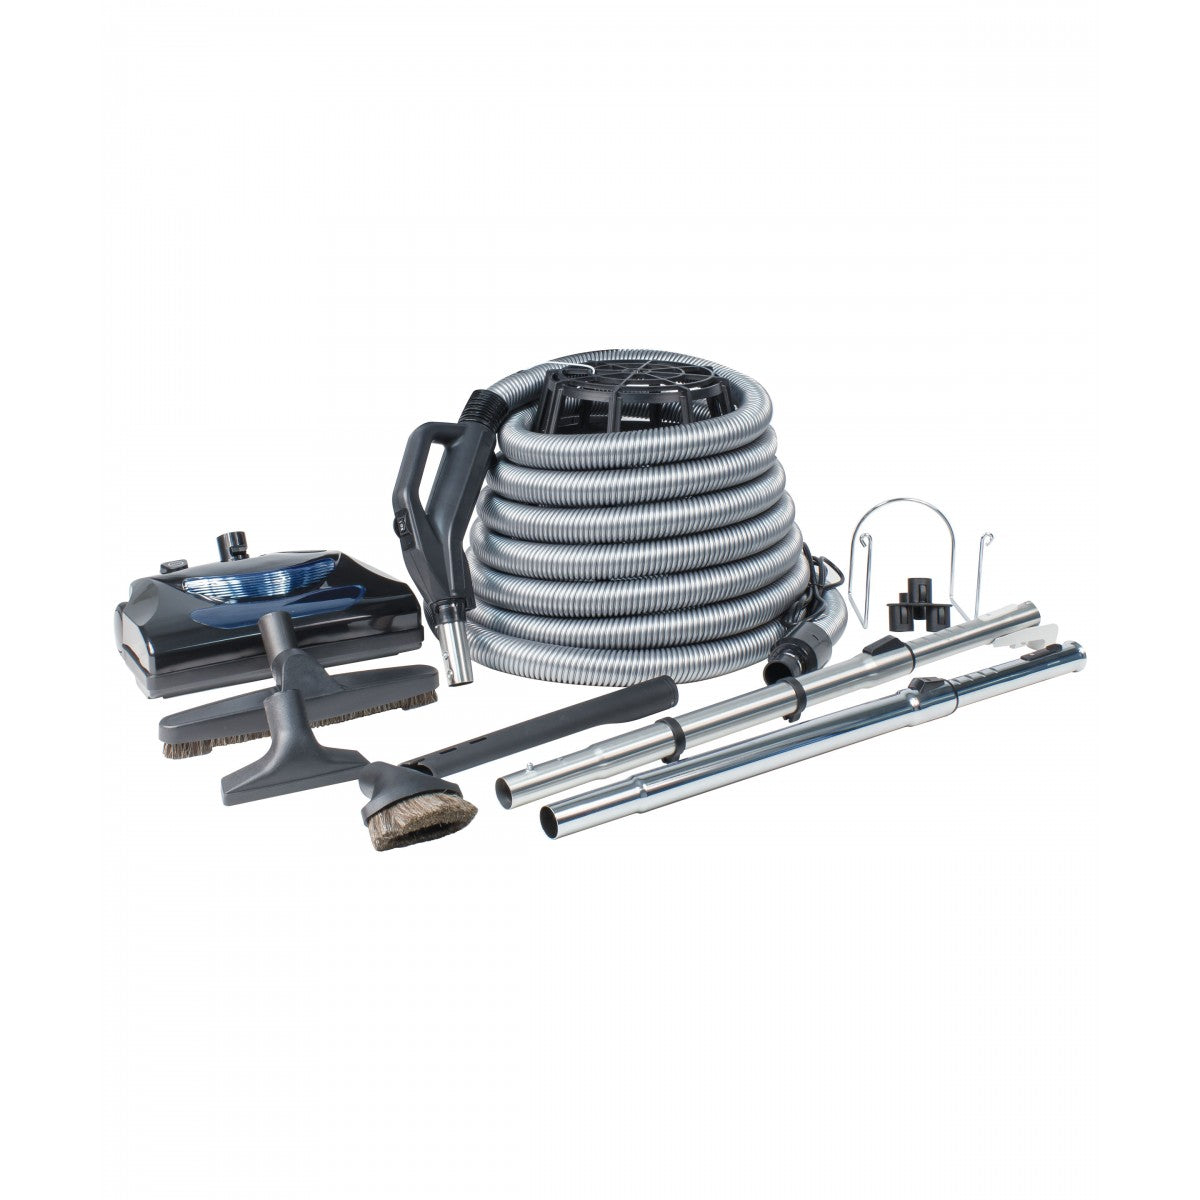 Central Vacuum Electric Attachment Kits